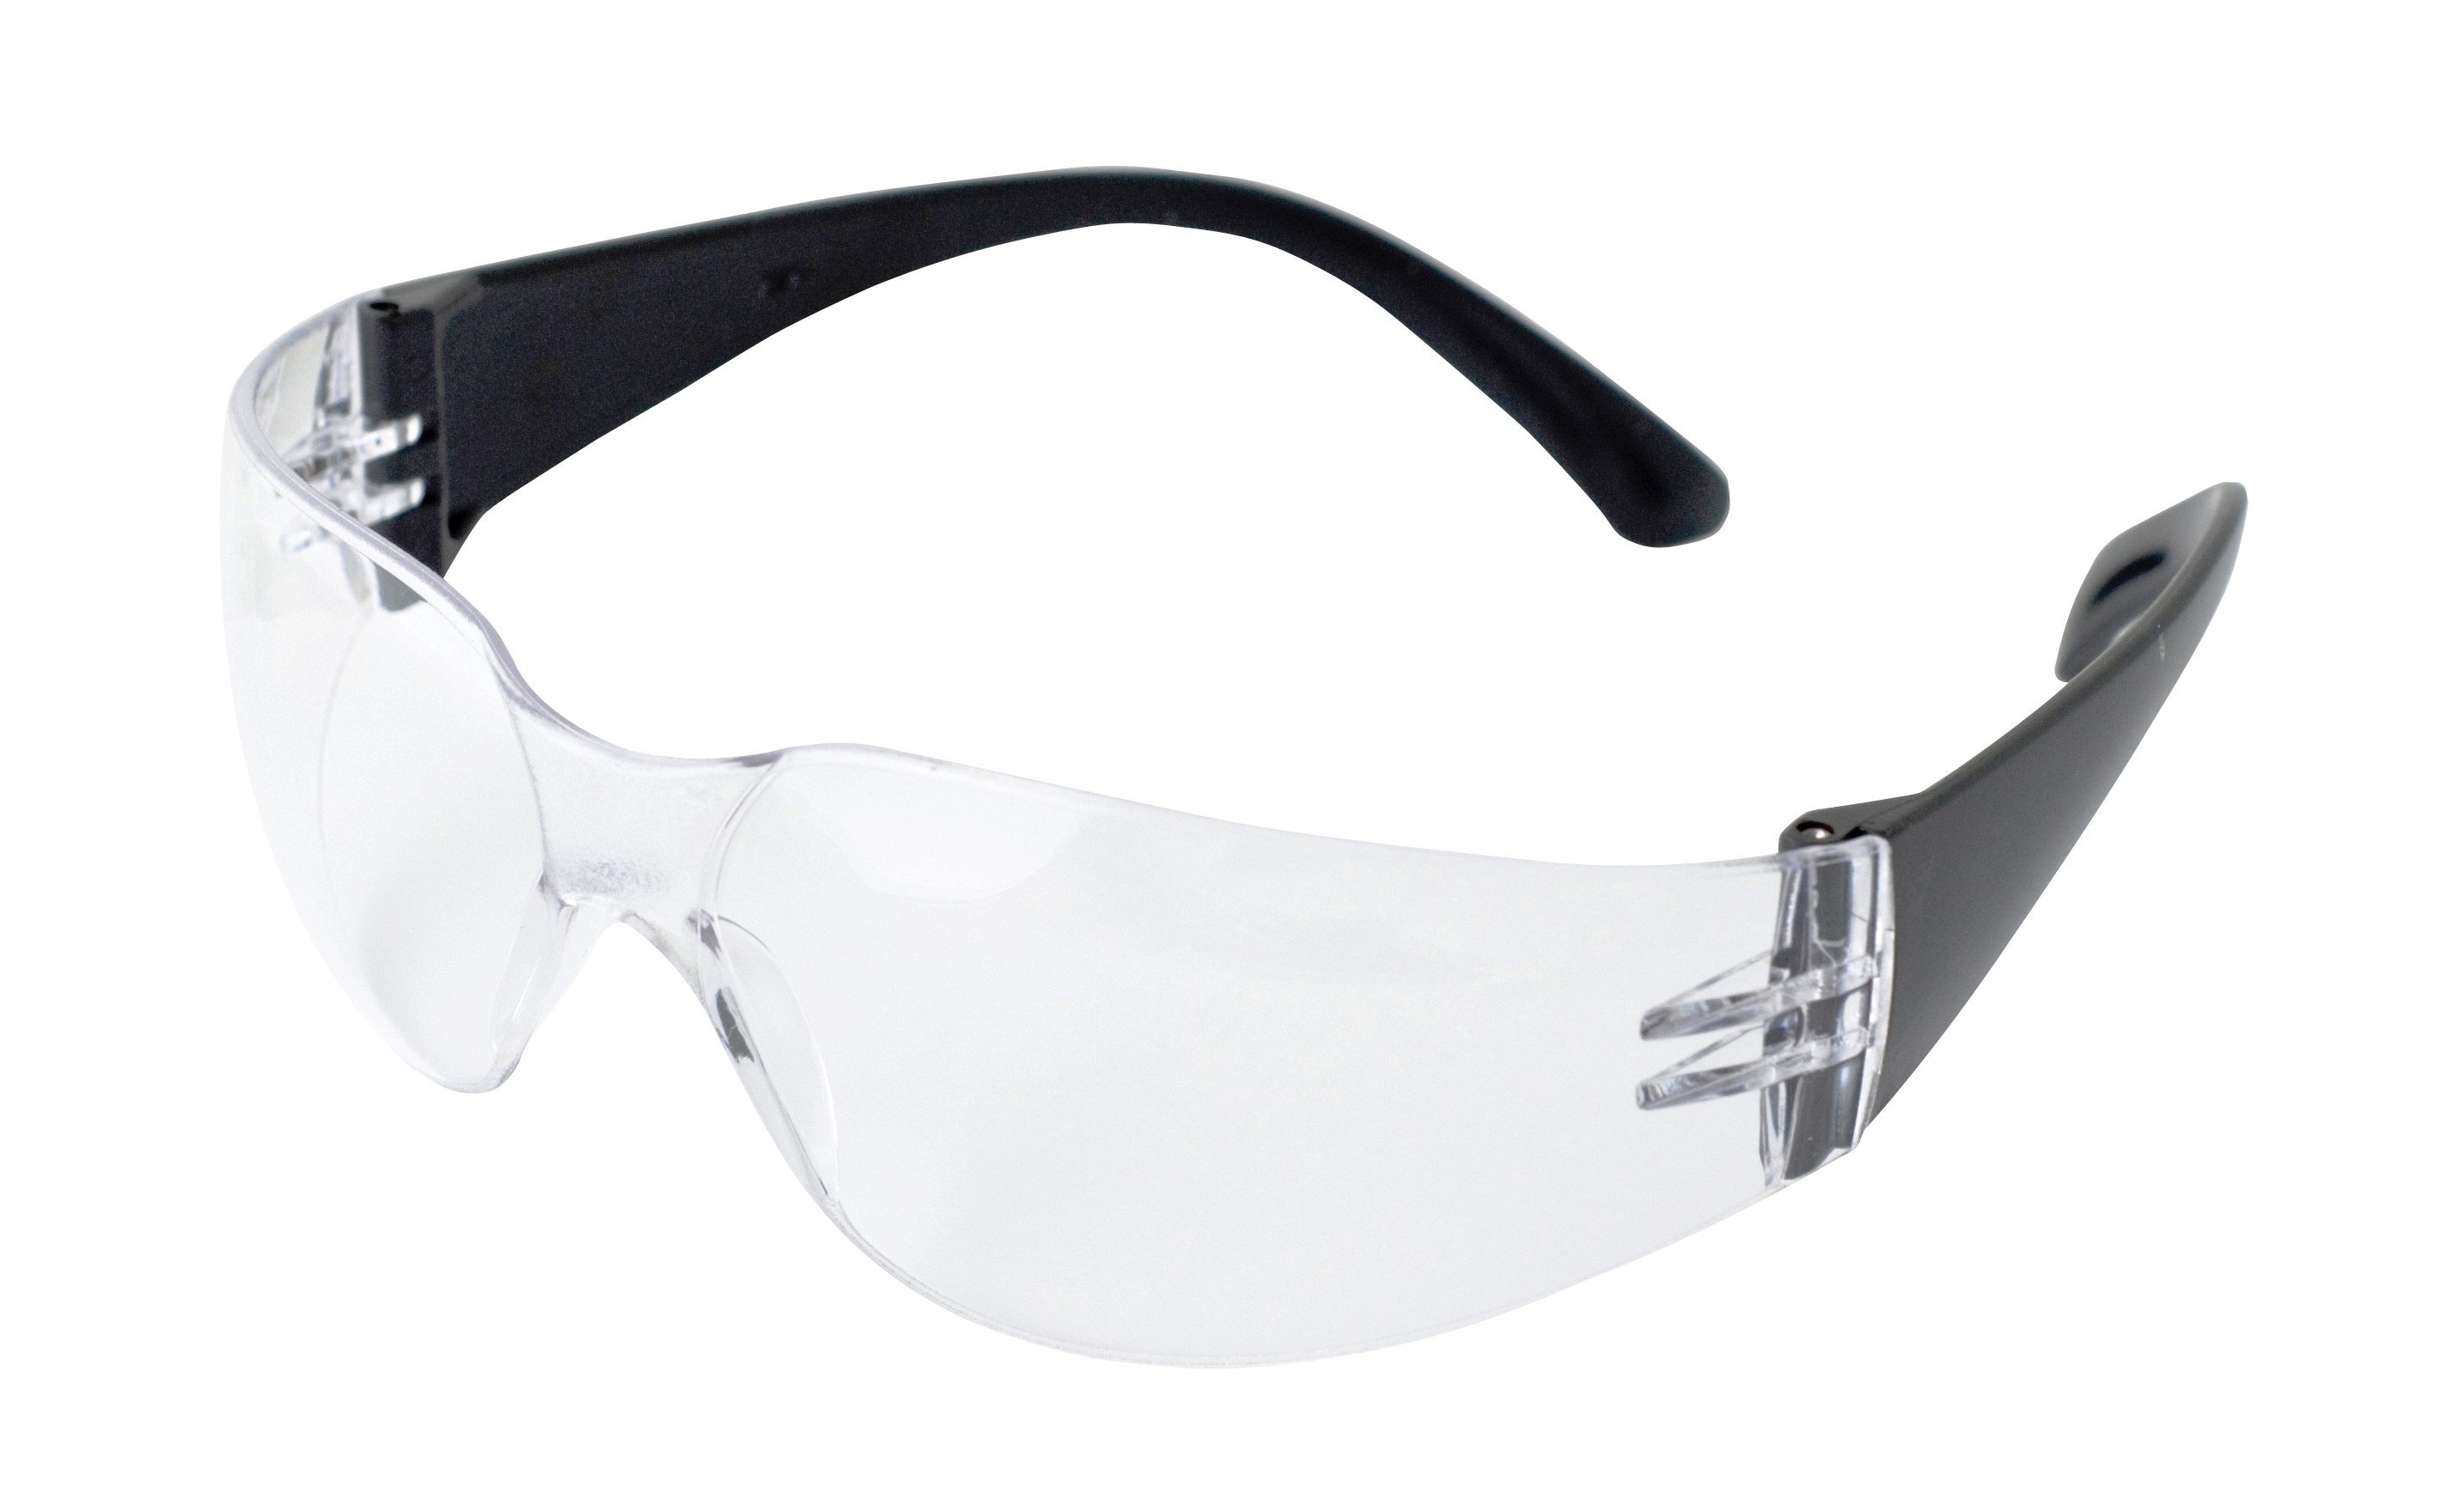 Betafit GENEVA Anti Scratch Lens Safety Spectacles - Clear